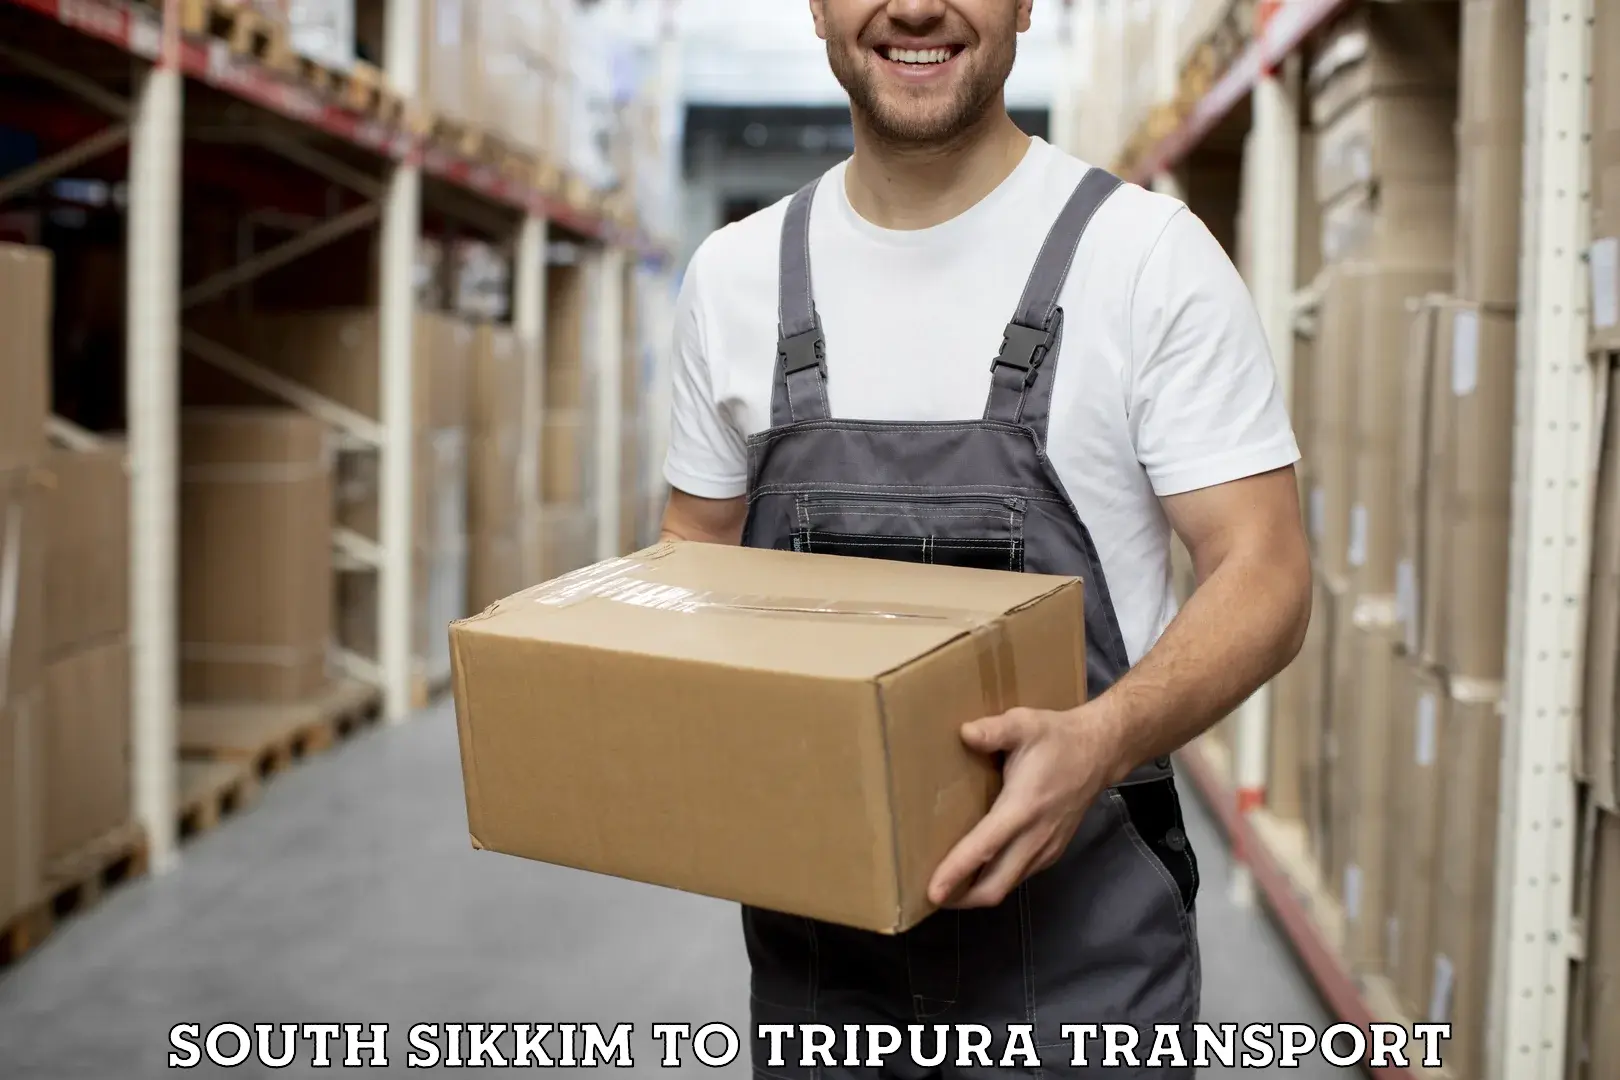 Parcel transport services South Sikkim to Agartala